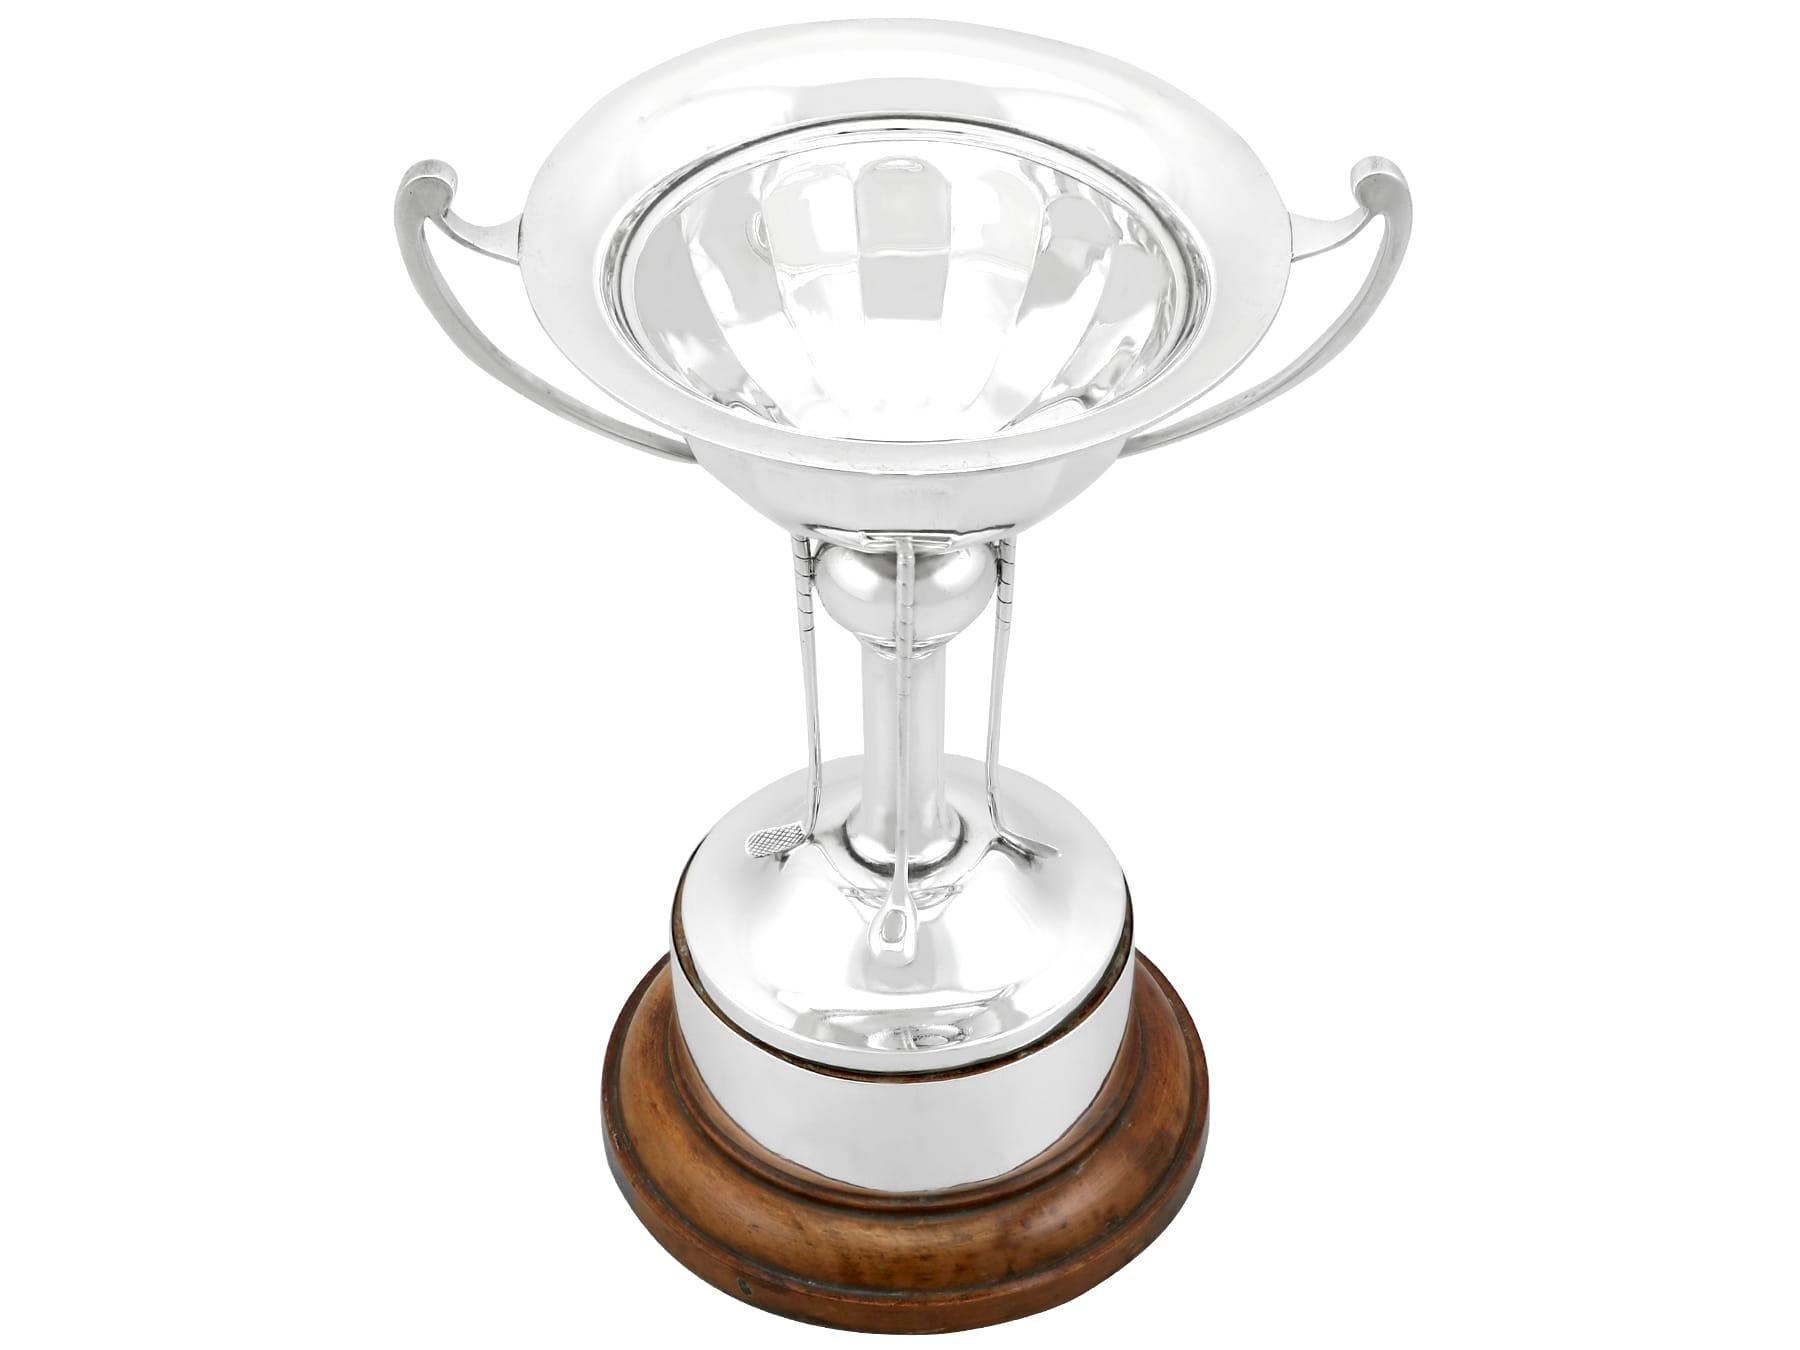 An exceptional, fine and impressive antique George V English sterling silver golf theme trophy cup; an addition to our ornamental office silverware collection

This exceptional antique George V sterling silver trophy cup has a circular rounded form